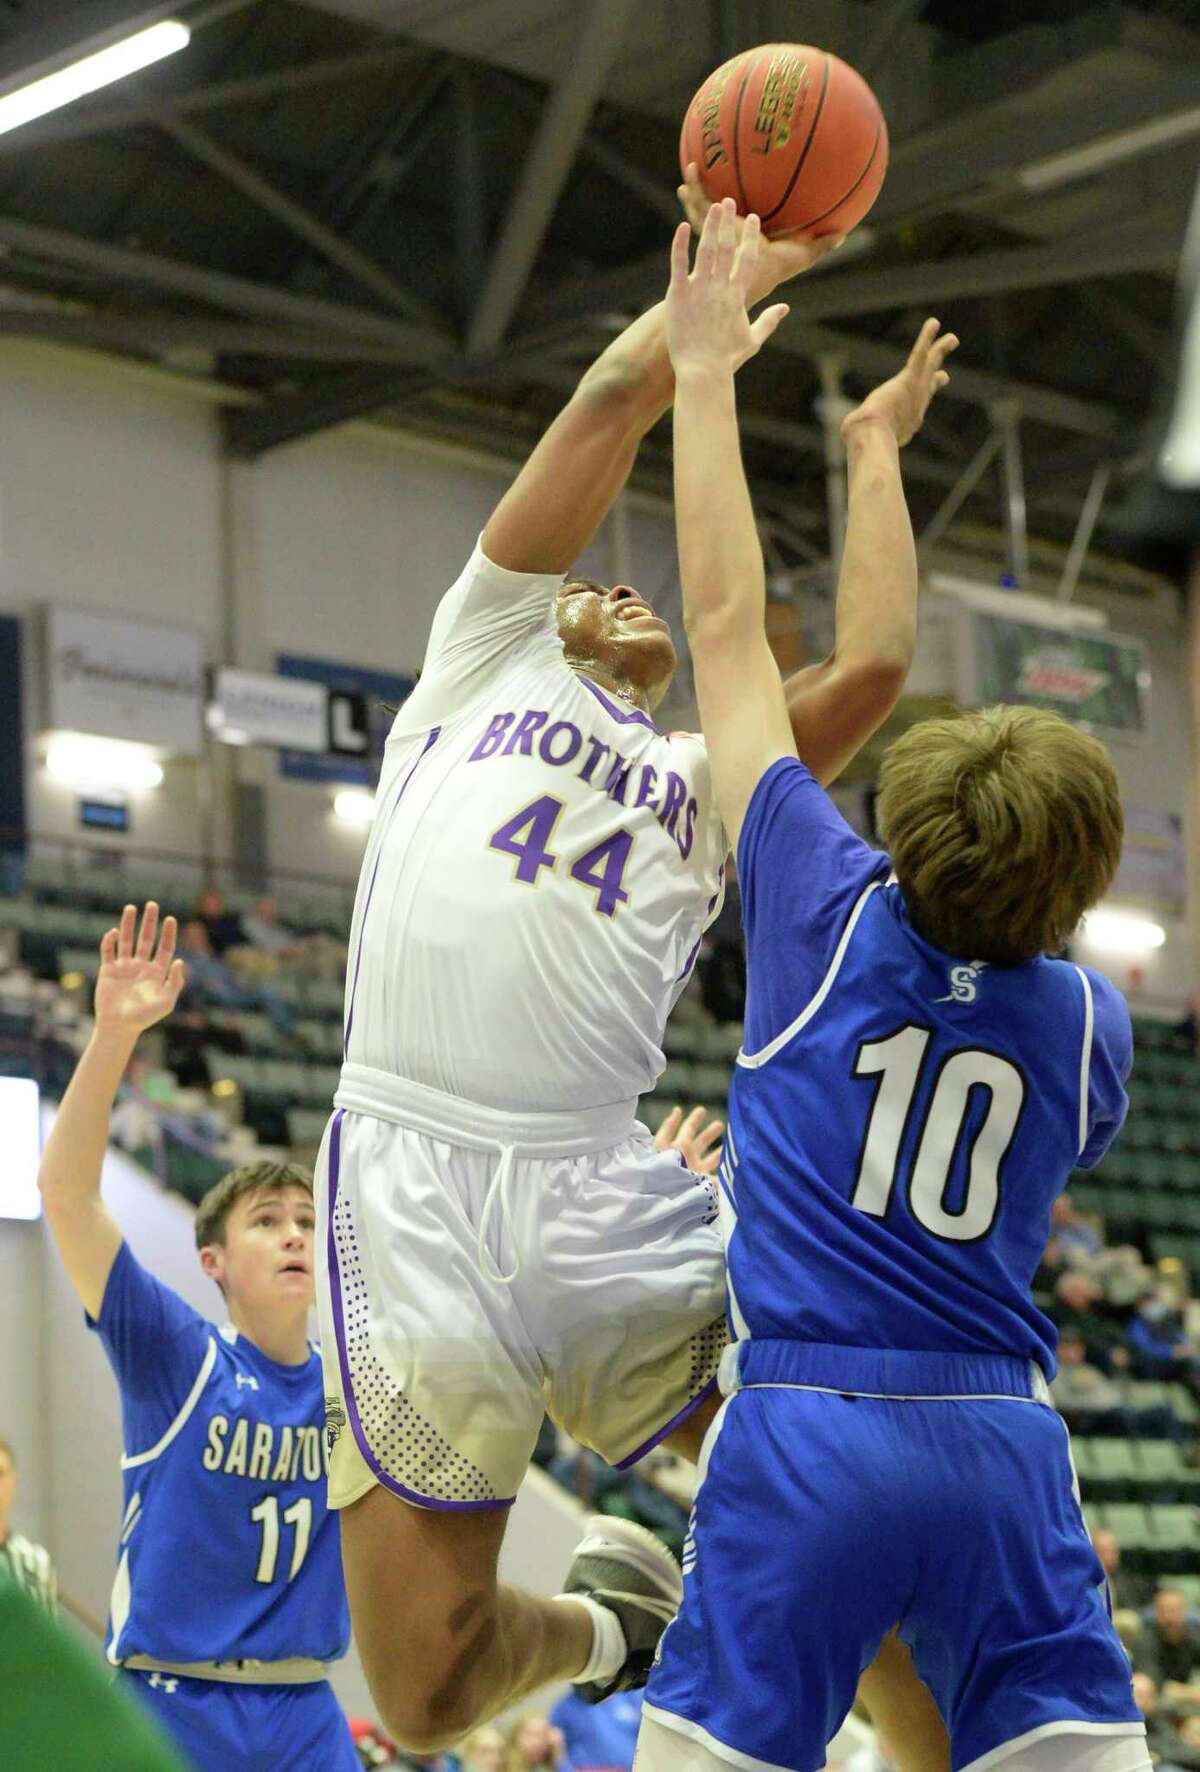 Saratoga Springs’ Andrew Masten attempts to block a shot by CBA’s Aiden Wine during their Class AA semifinal at Cool Insuring Arena in Glens Falls, N.Y. on Thursday, Mar. 2, 2023. (Jenn March, Special to the Times Union)